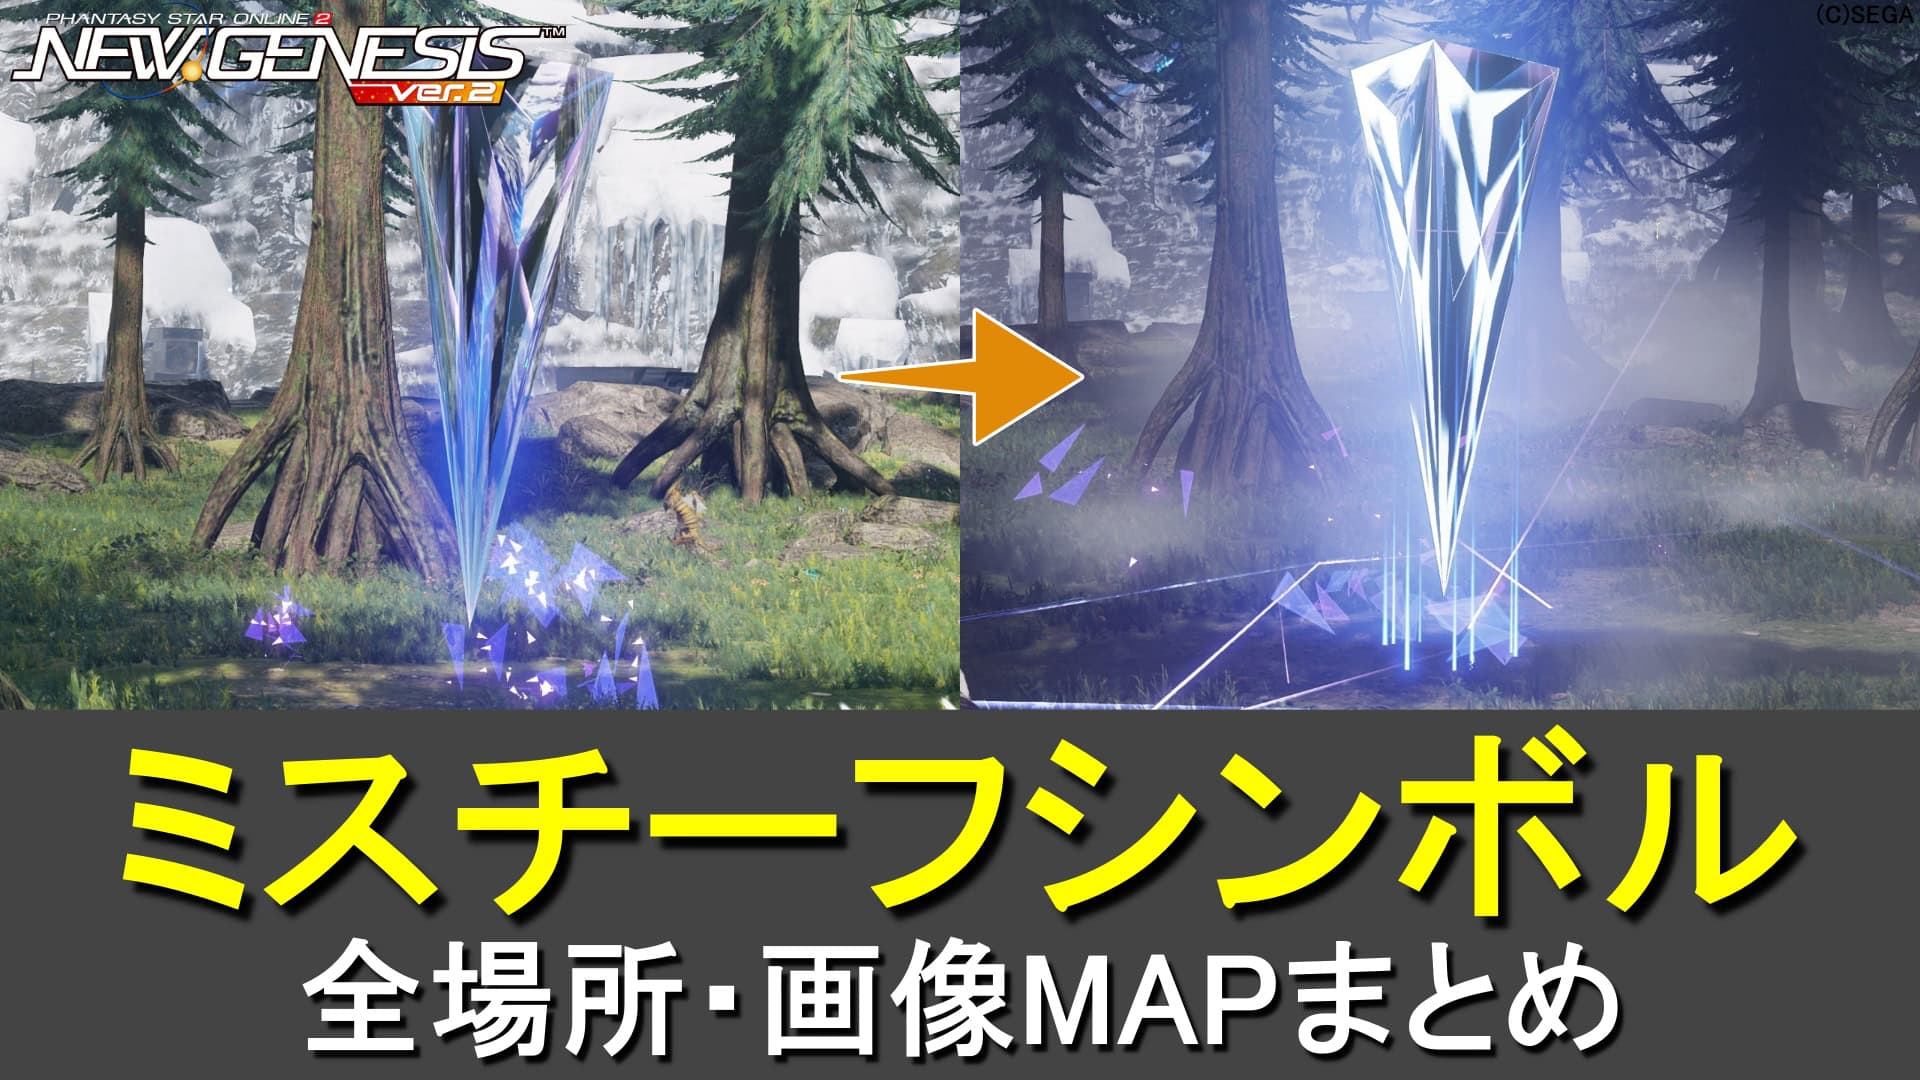 【PSO2NGS】ミスチーフシンボルの場所まとめ解説【画像MAP】